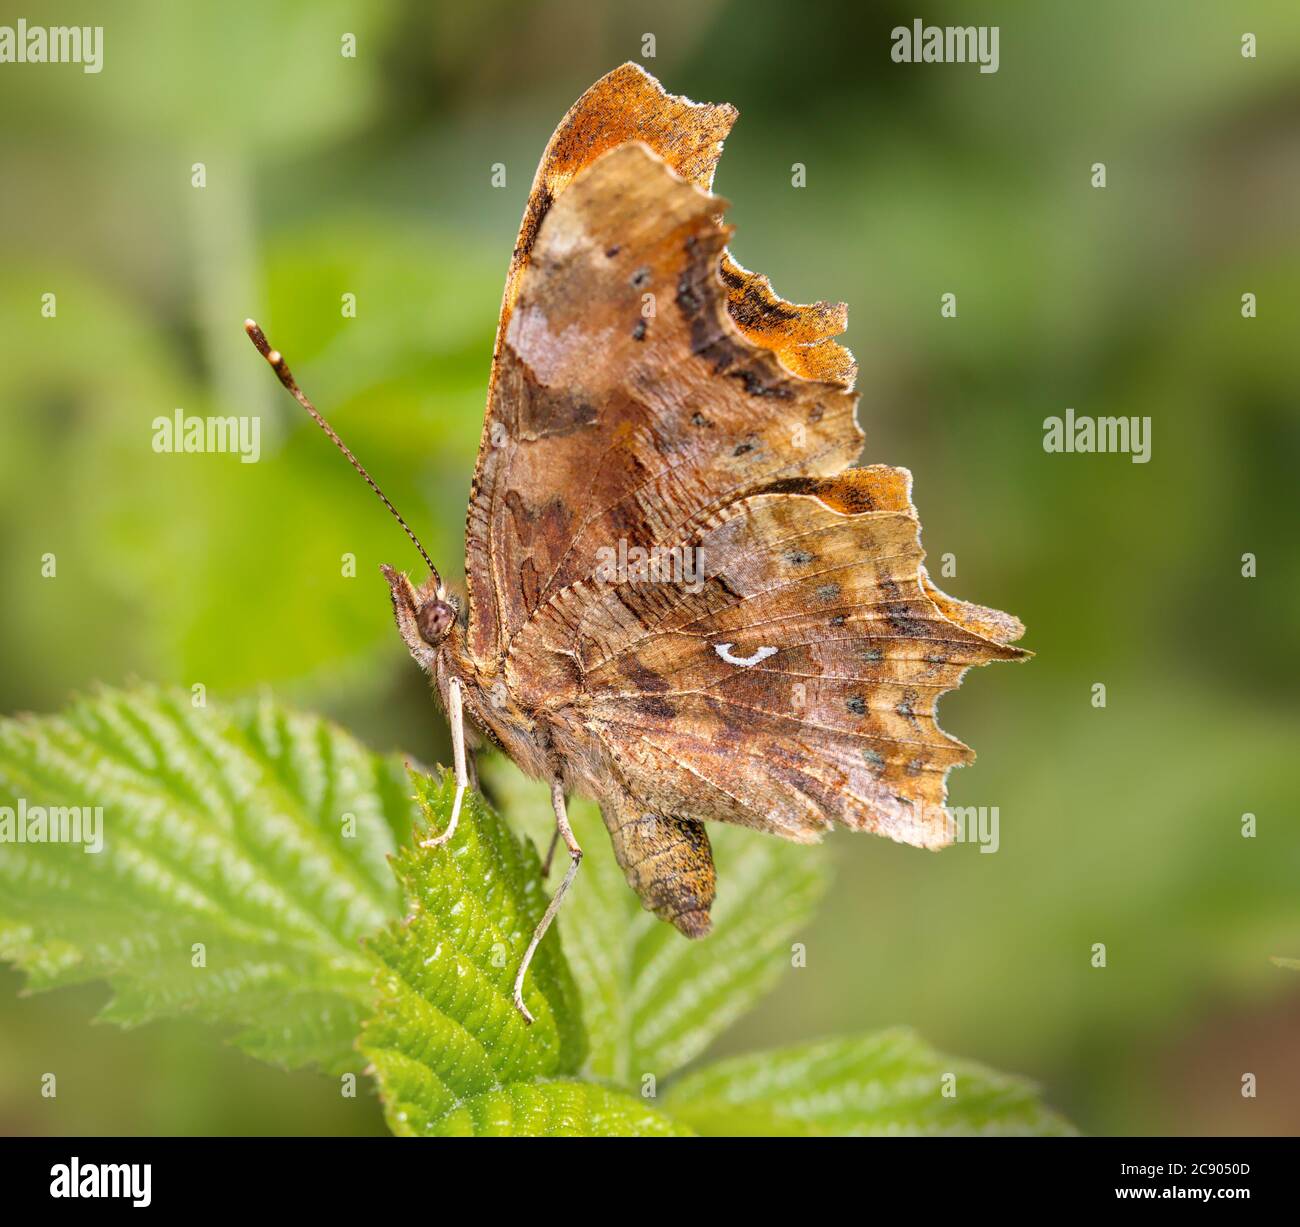 Comma Butterfly, Polygonia c-album, Resting, Sitting With Wings Up Showing Distinctive Comma Mark,  On A Bramble Leaf. Taken at Longham Lakes UK Stock Photo